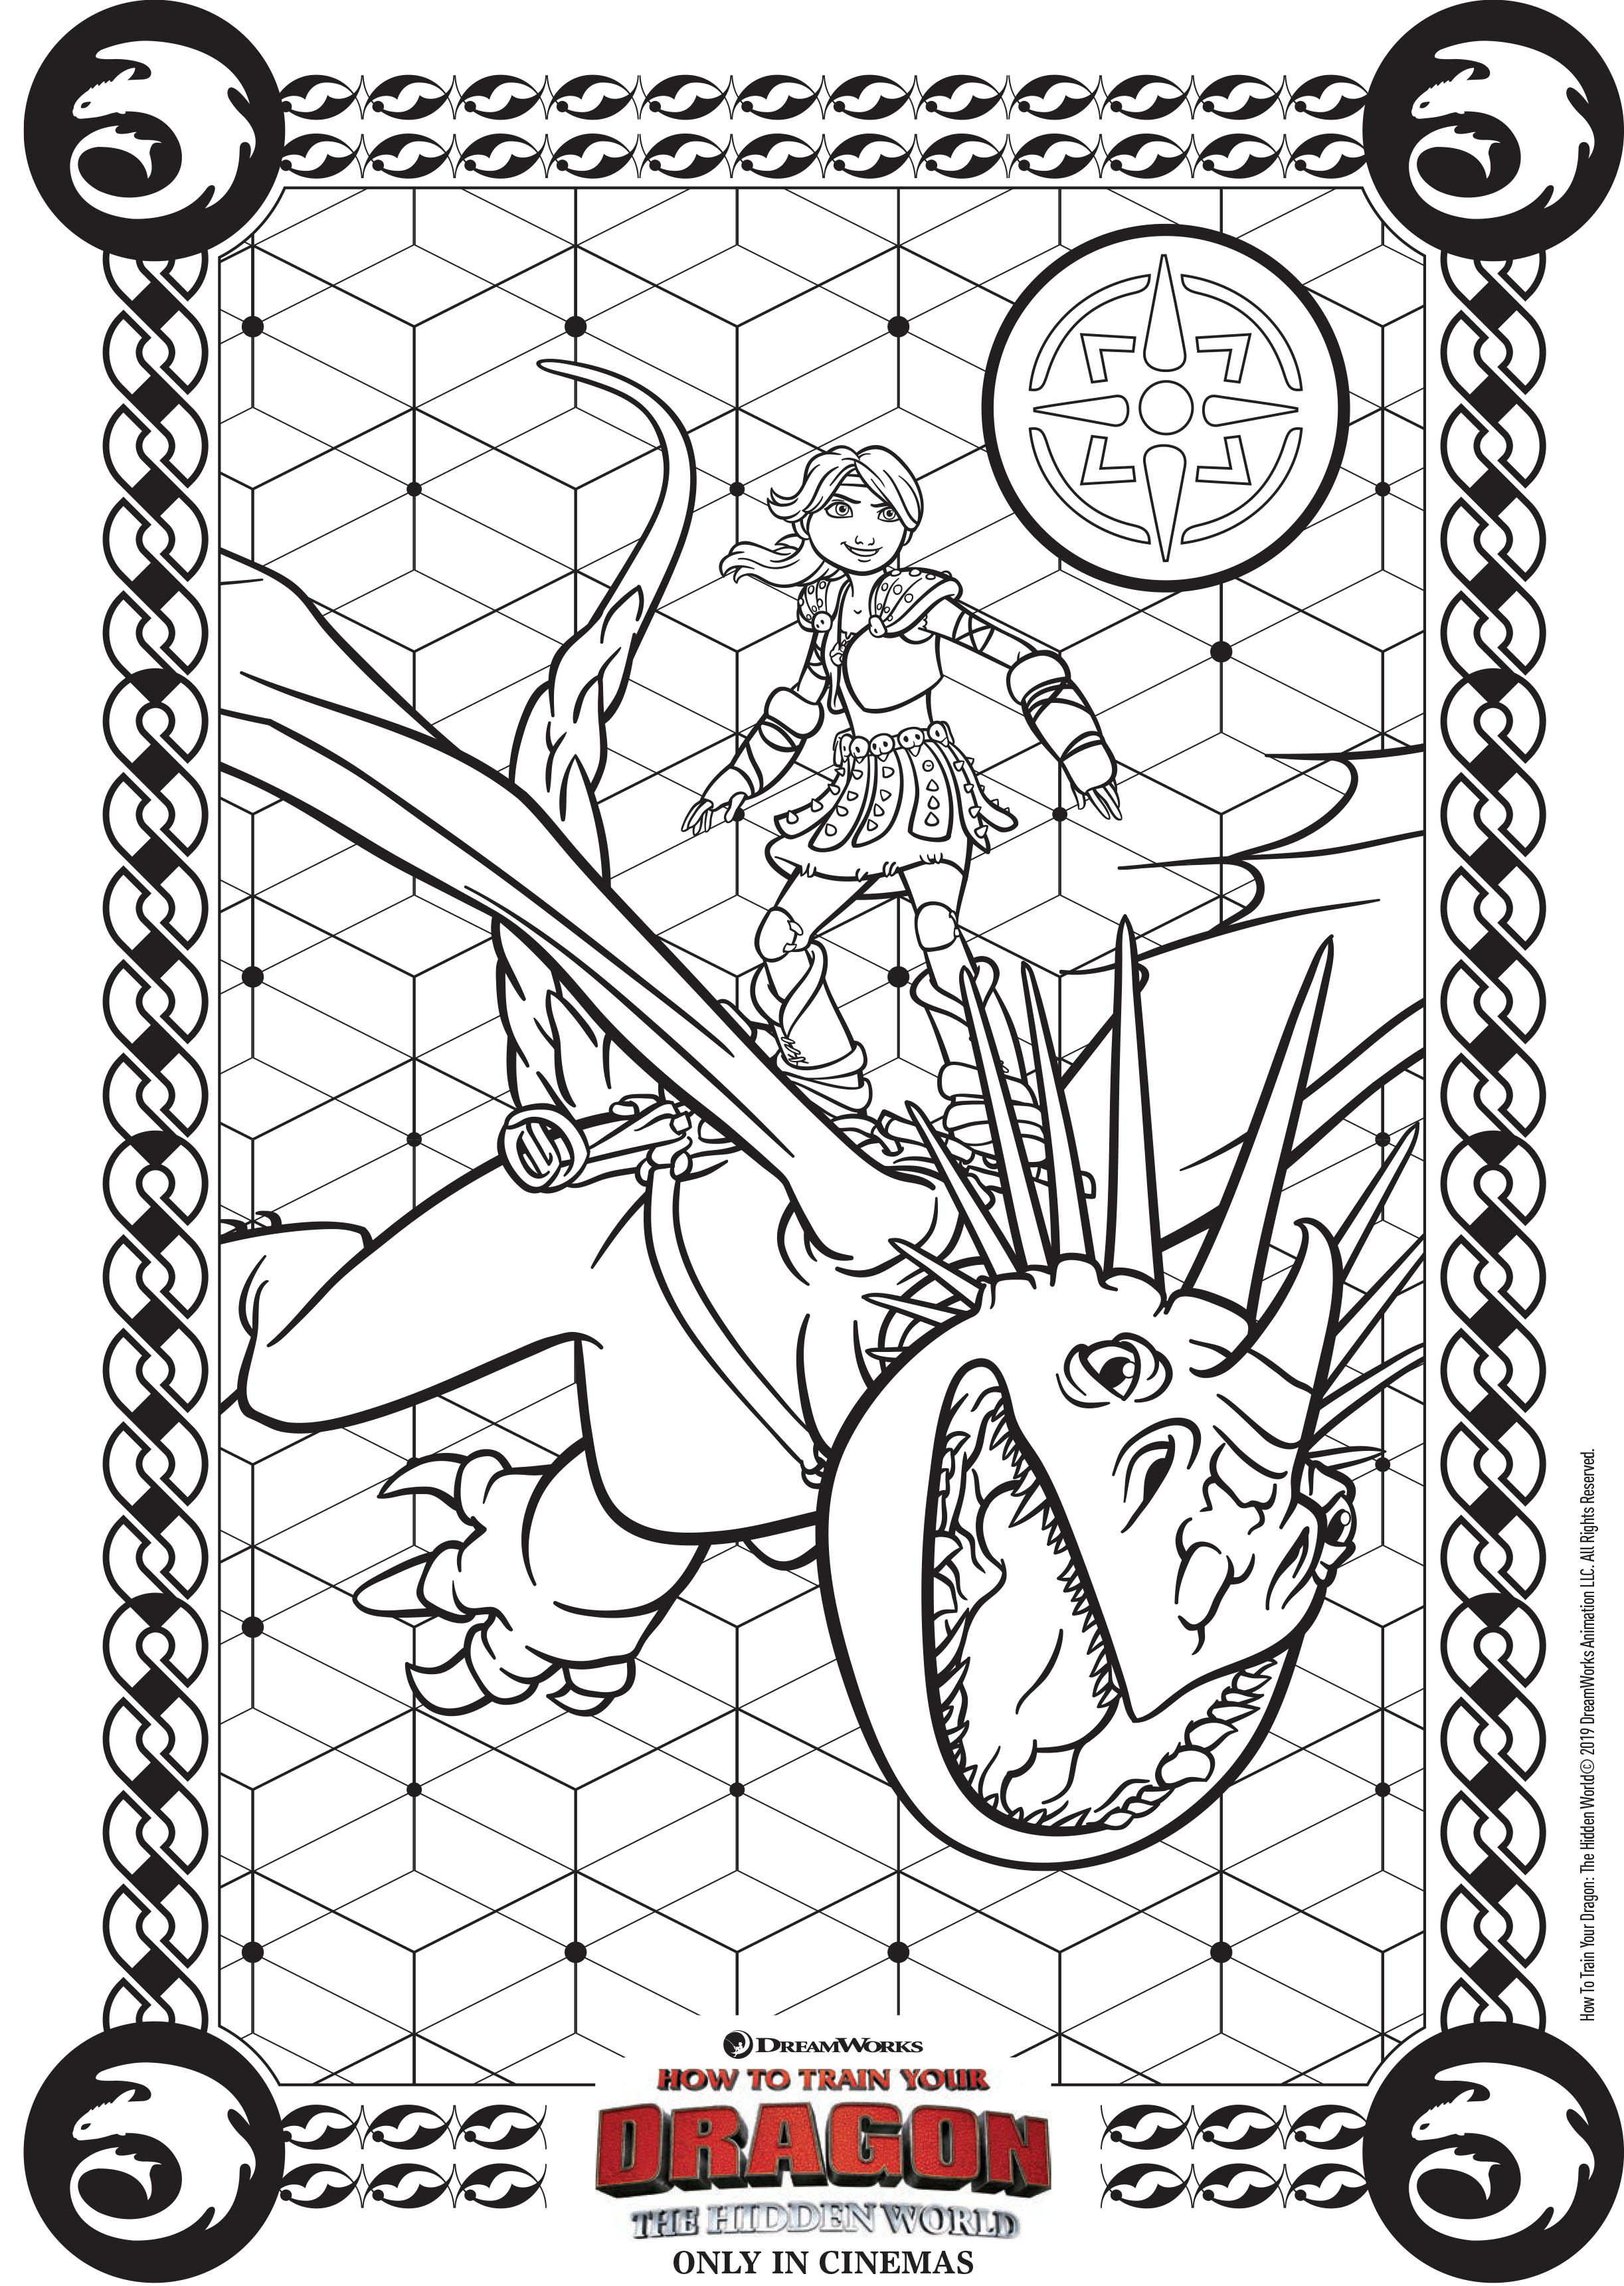 Dragons From How To Train Your Dragon Coloring Pages - mwowjunky